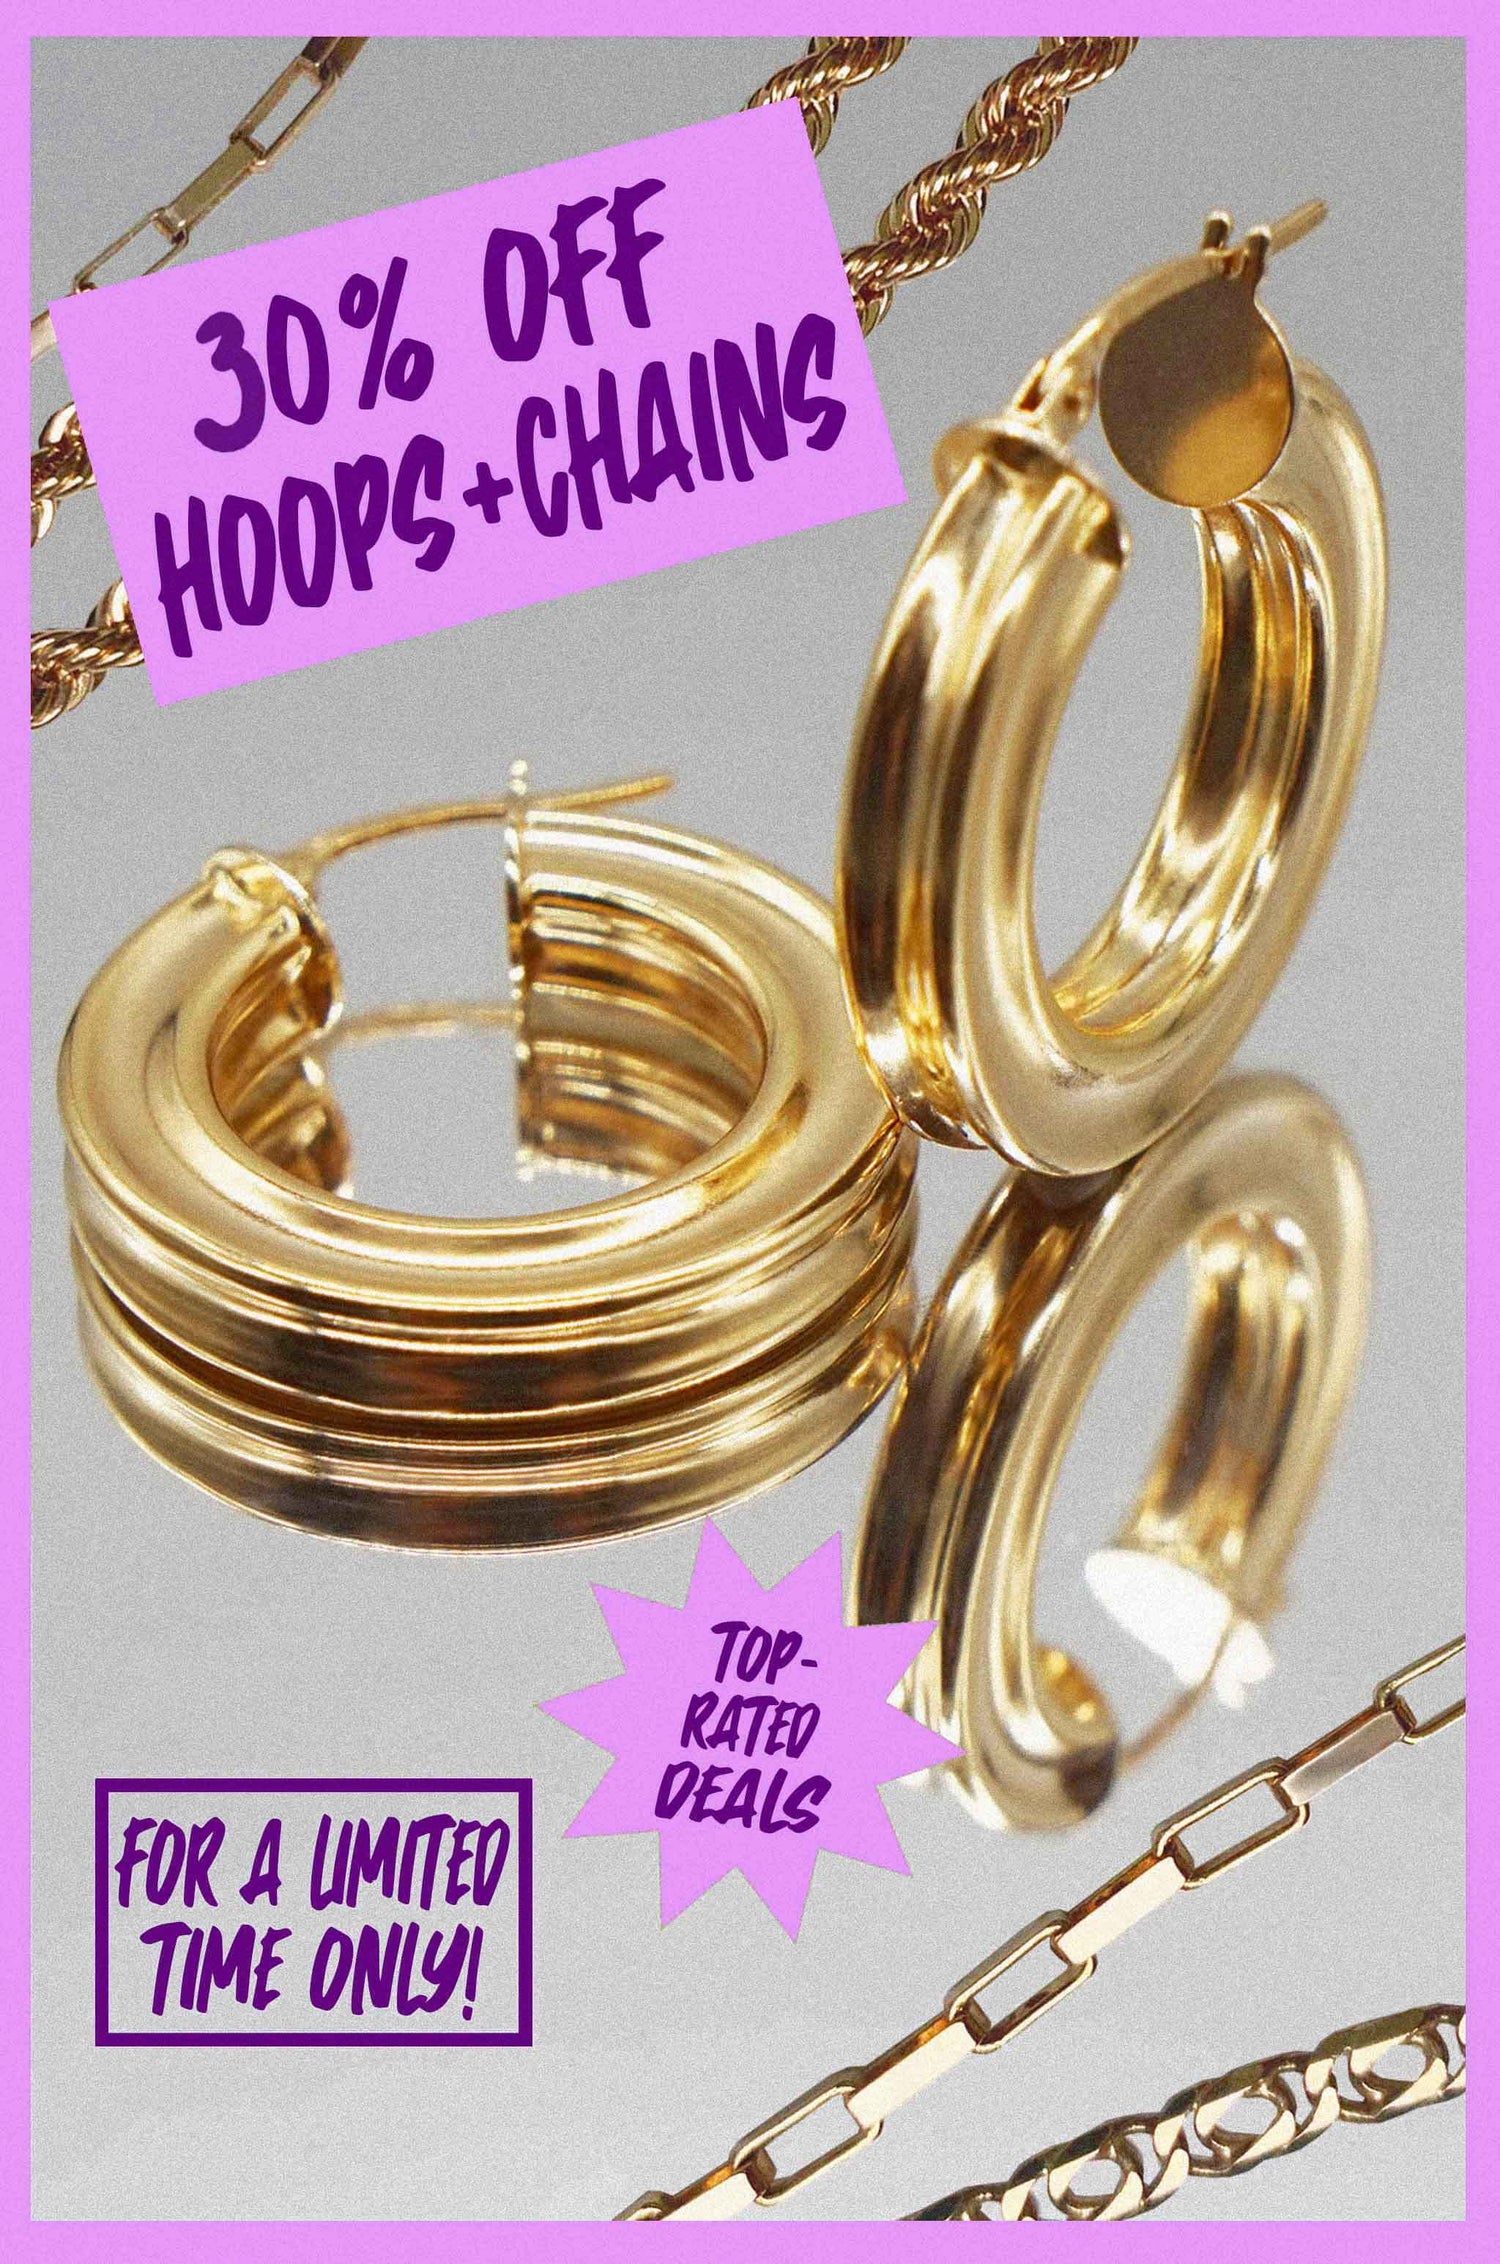 HOOPS & CHAINS 30% OFF